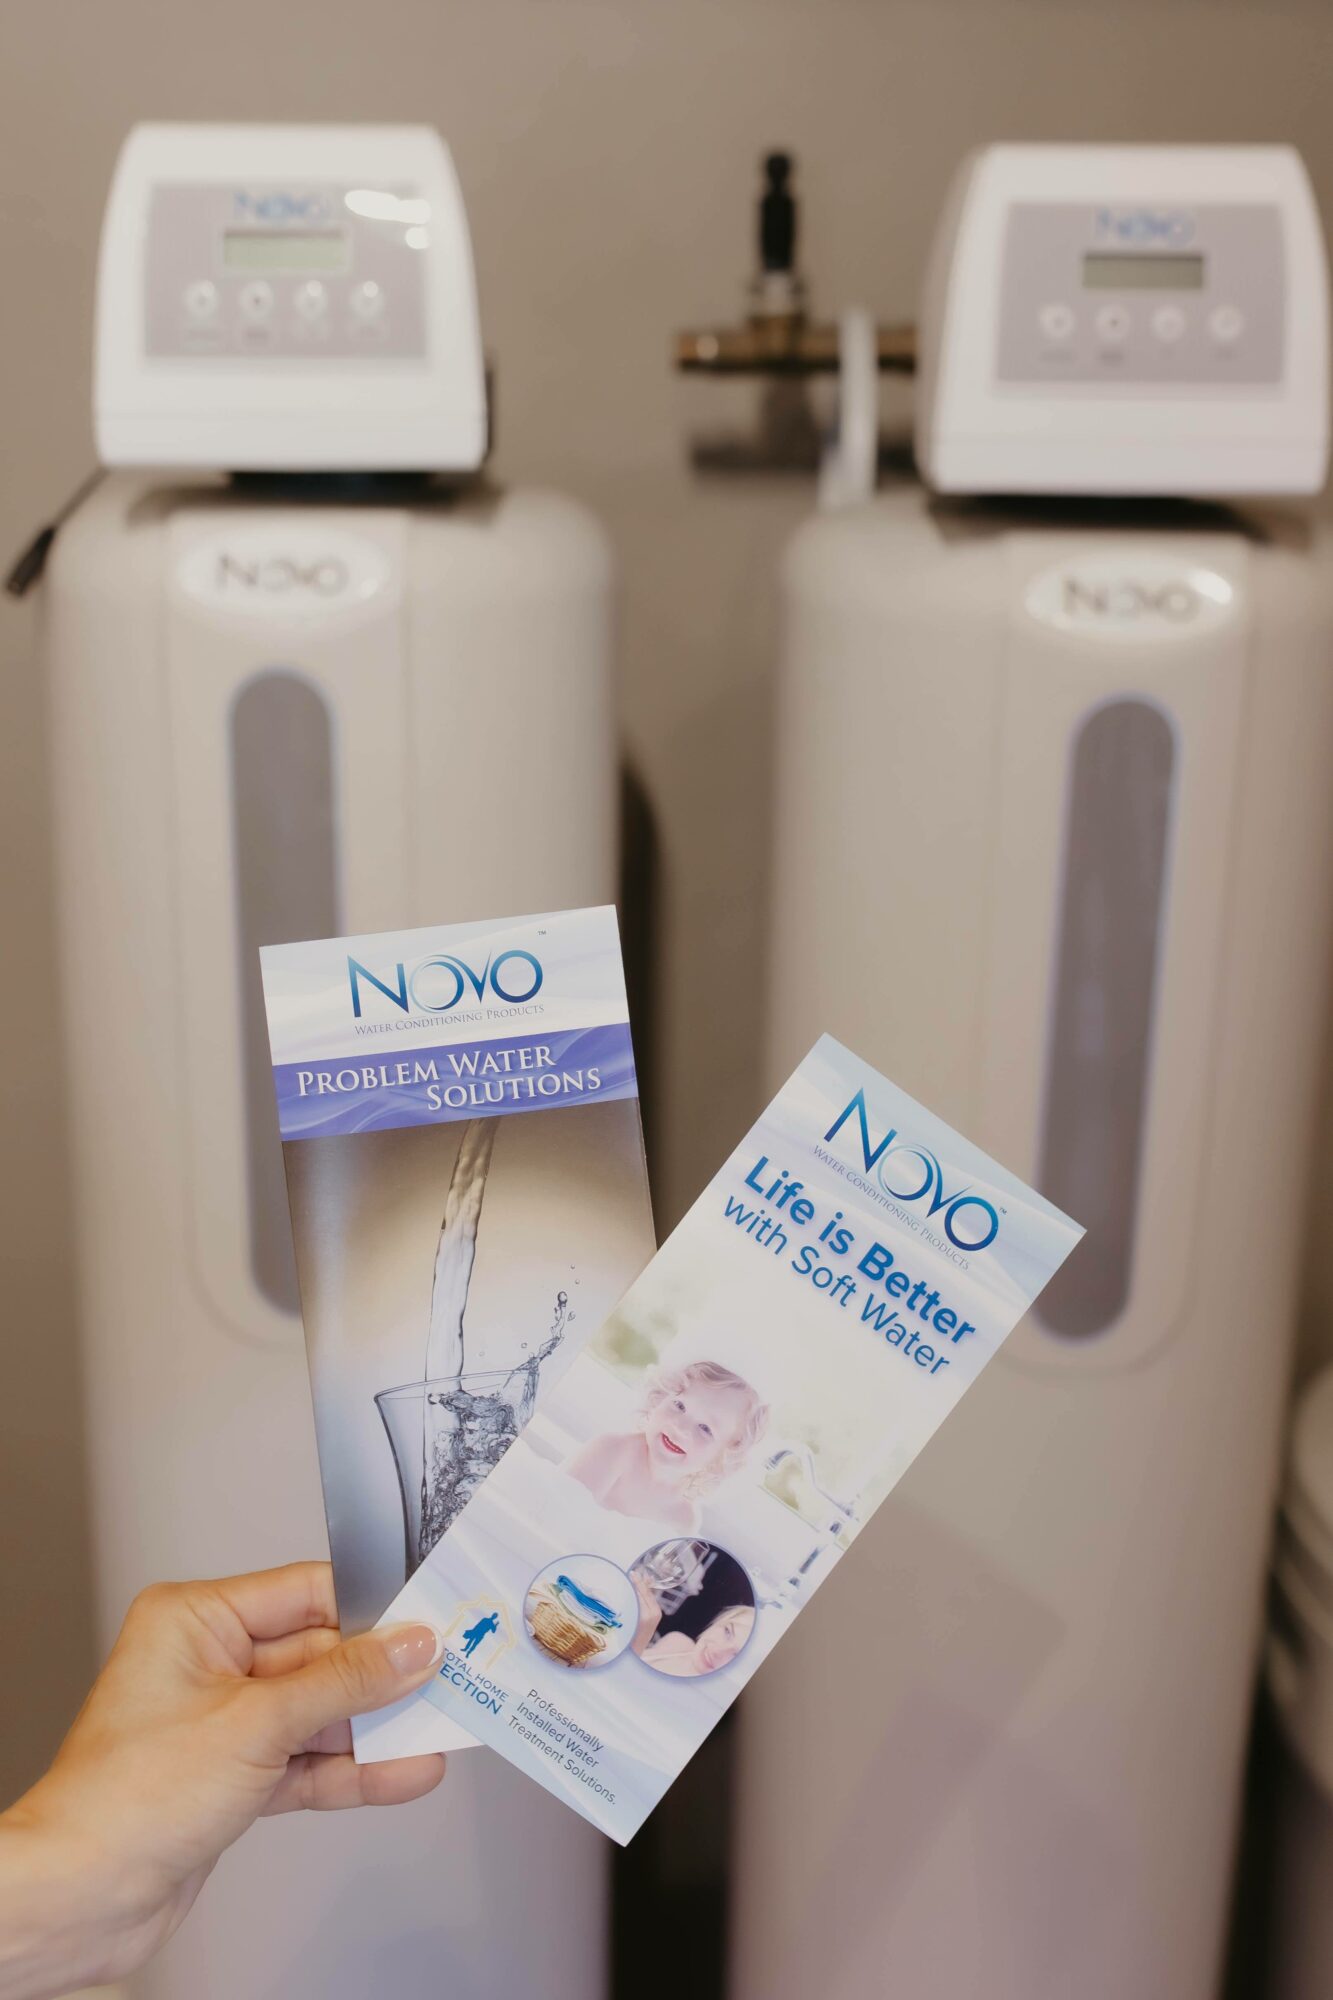 Nova Water Treatment System for Whole Home Water Softener